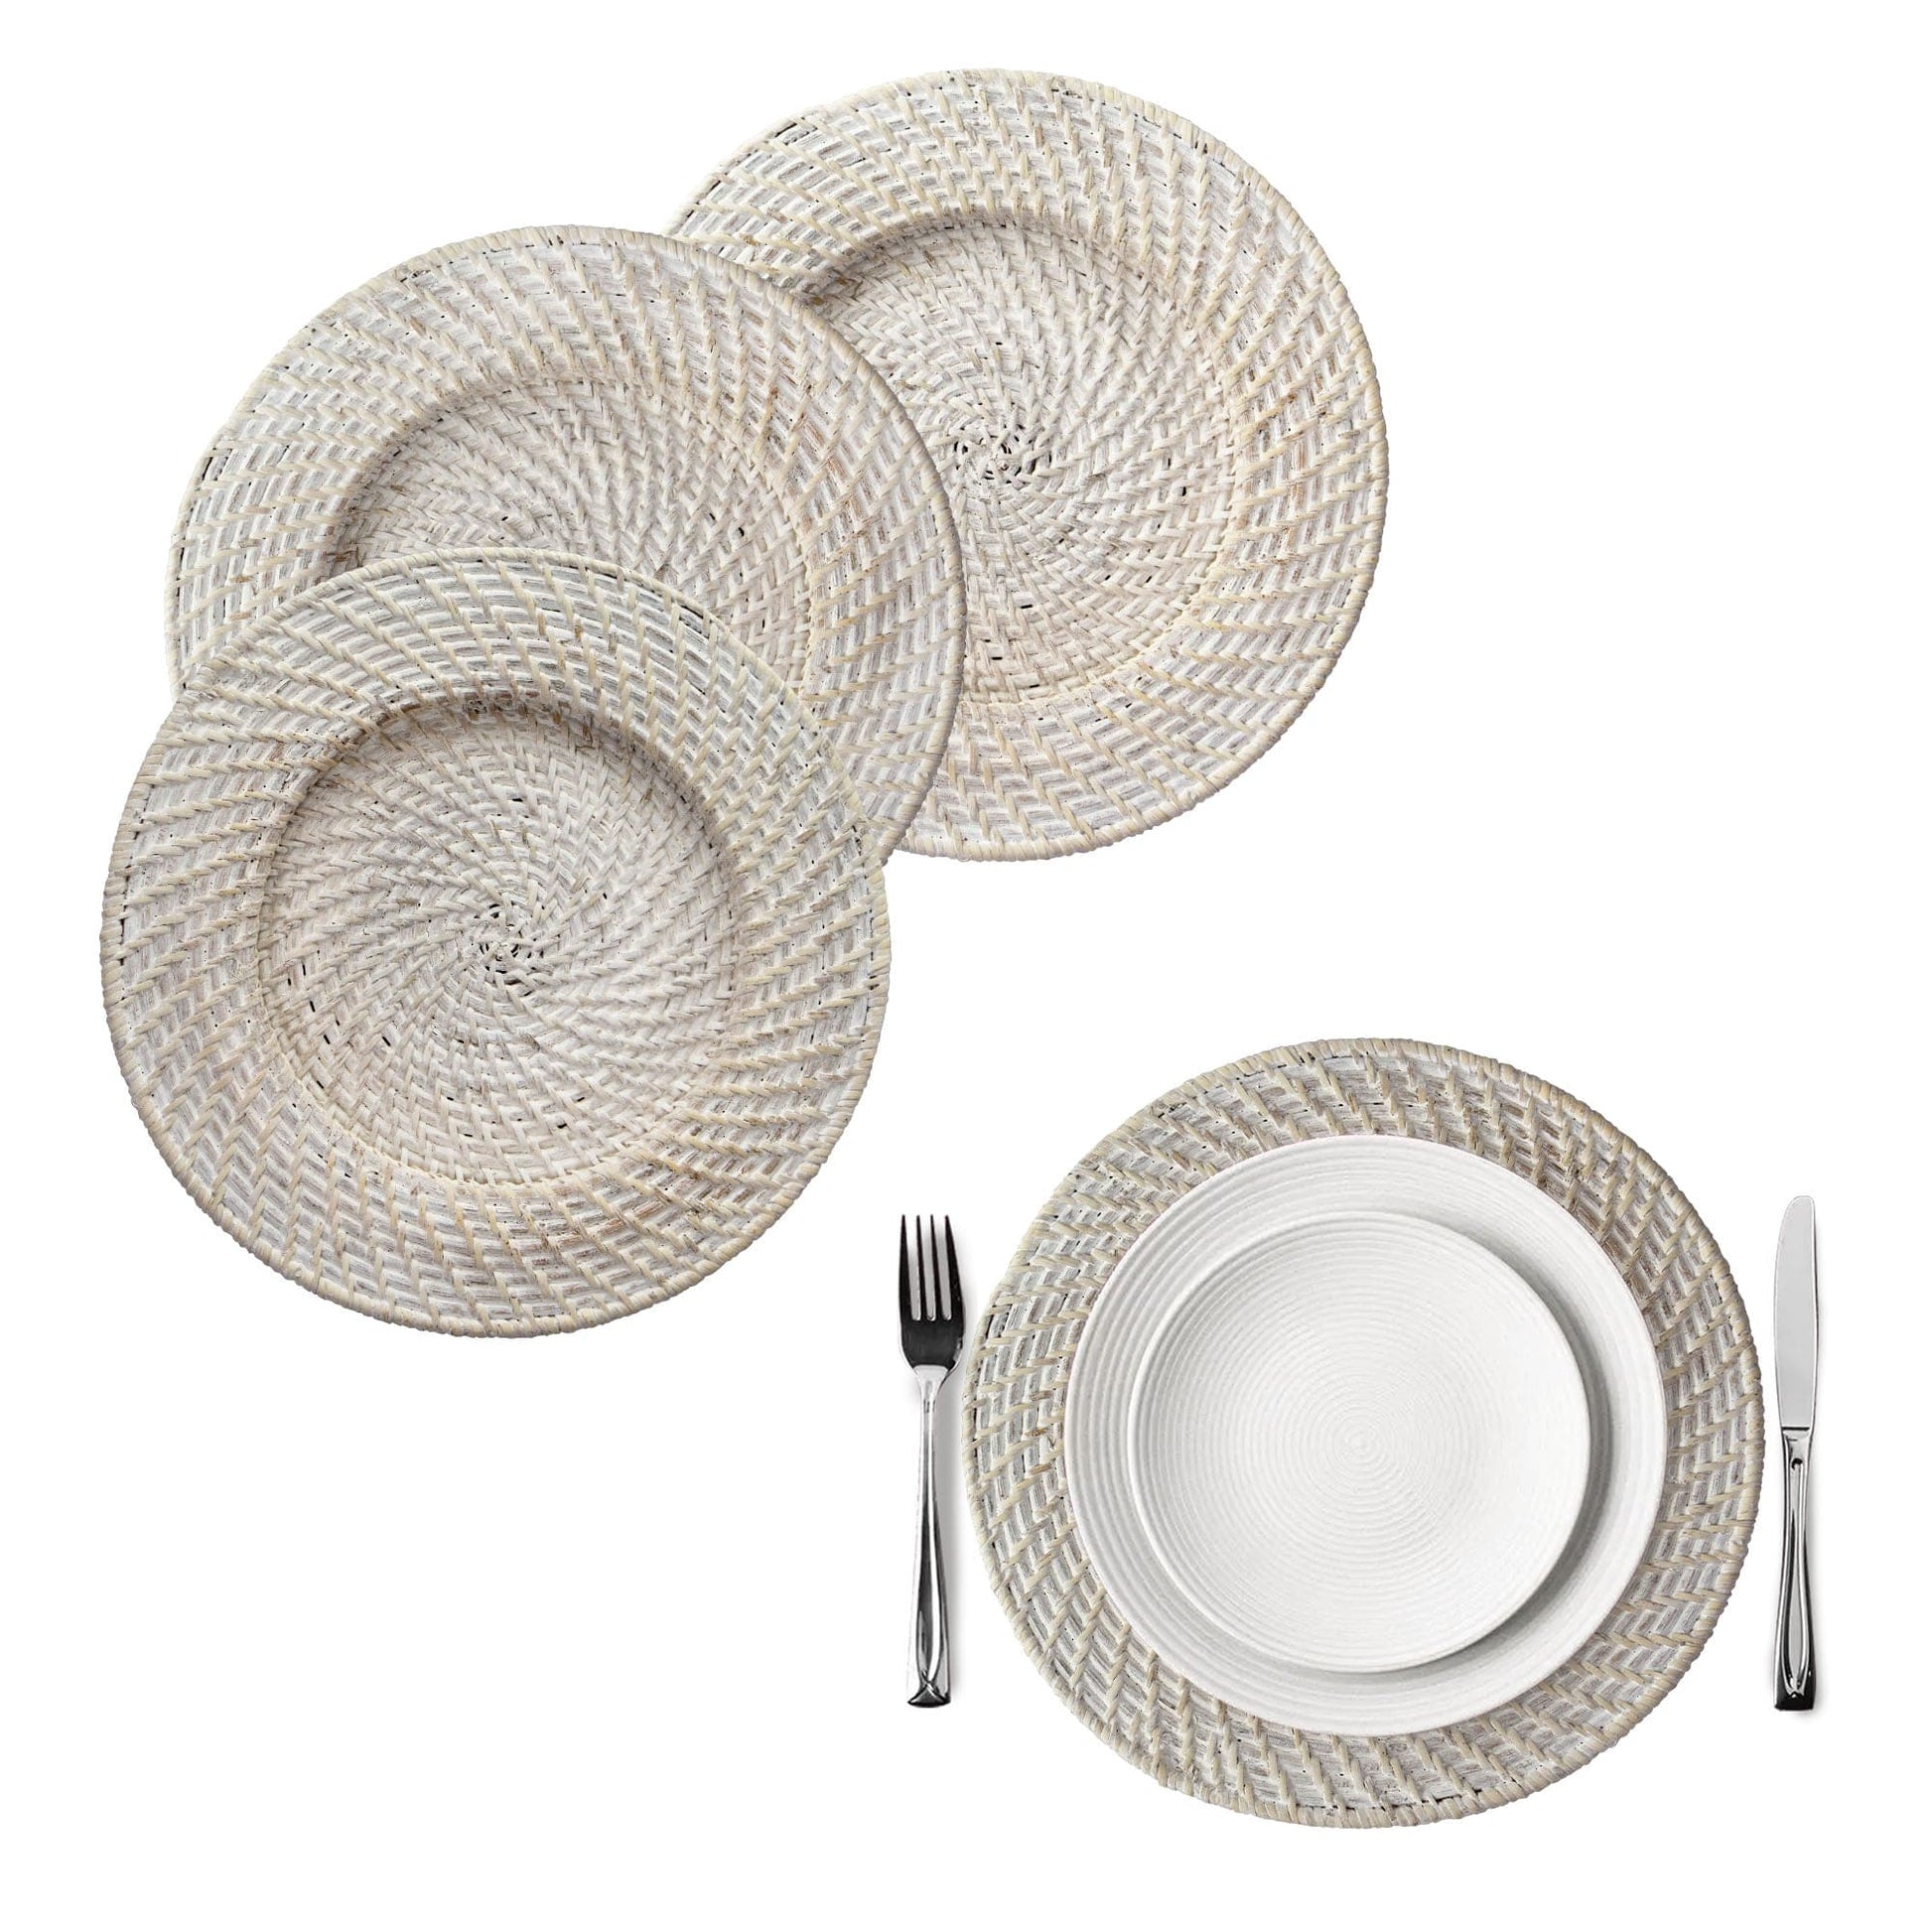 Round Wicker Charger | Woven Rustic Dinnerware Tableware for Dinner, Party, Wedding - Almondscove